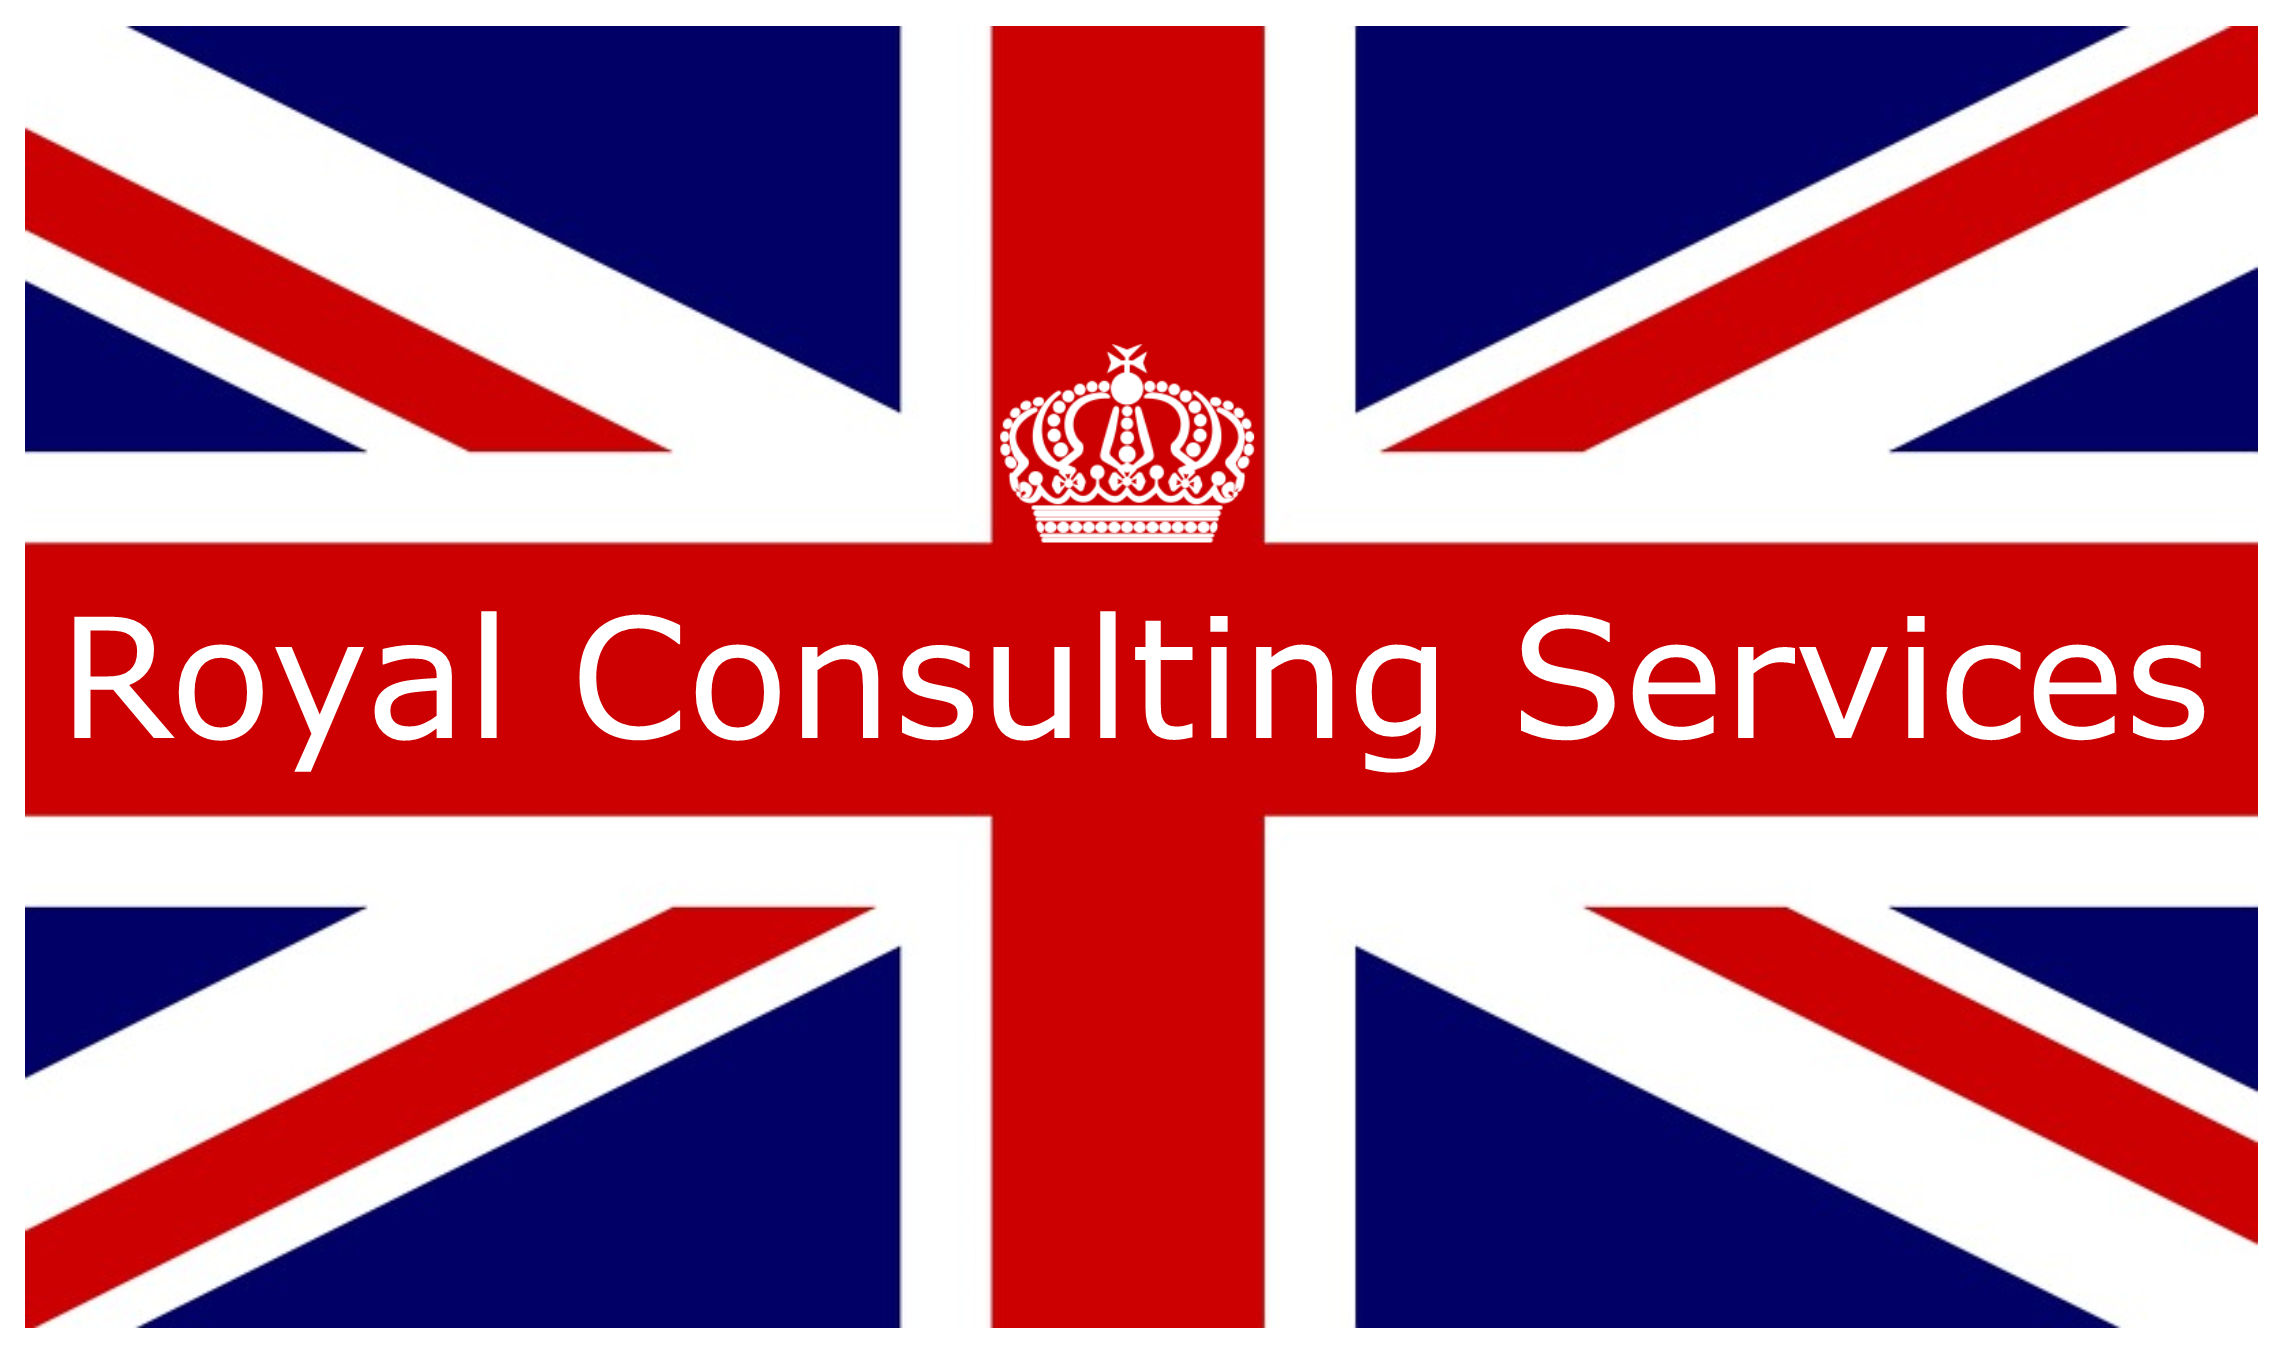 Royal Consulting Services